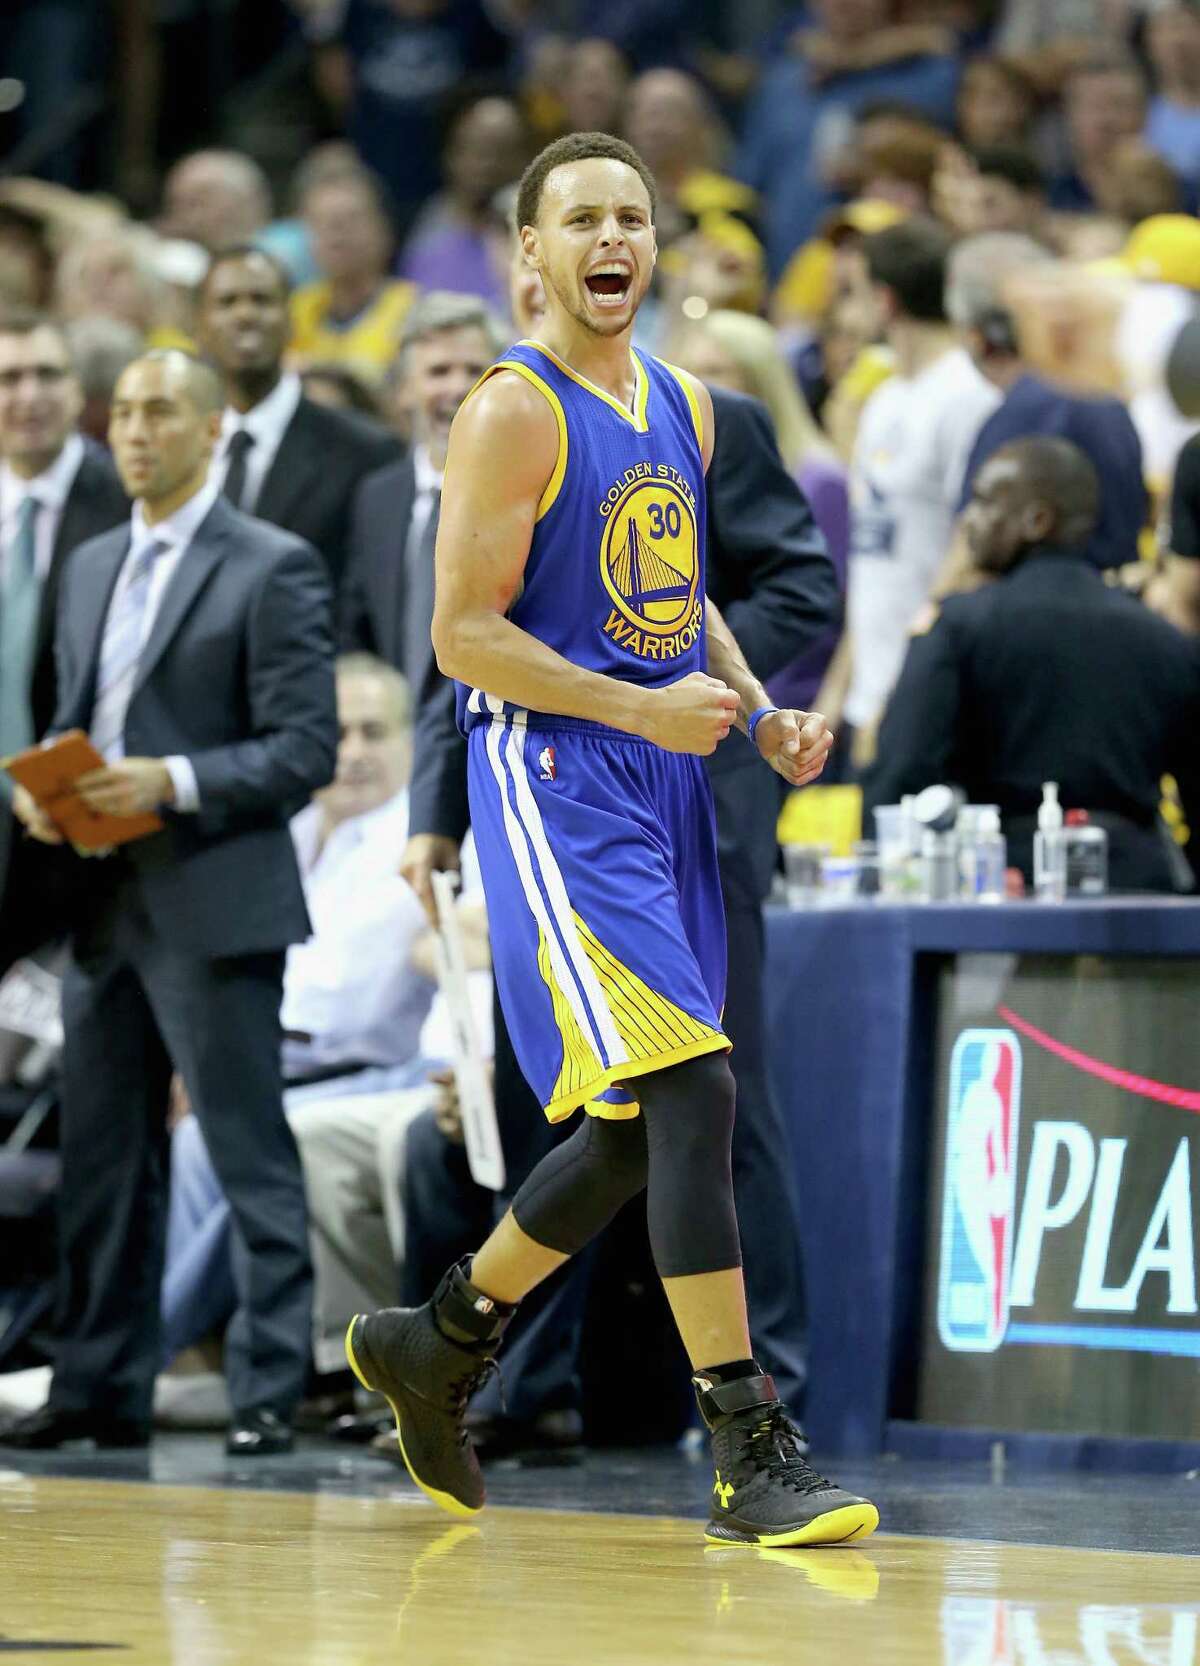 Stephen Curry of the Golden State Warriors celebrates after making a basket to end the third quarter against the Memphis Grizzlies during Game 6 of the Western Conference semifinals at FedExForum on May 15, 2015 in Memphis, Tennessee.